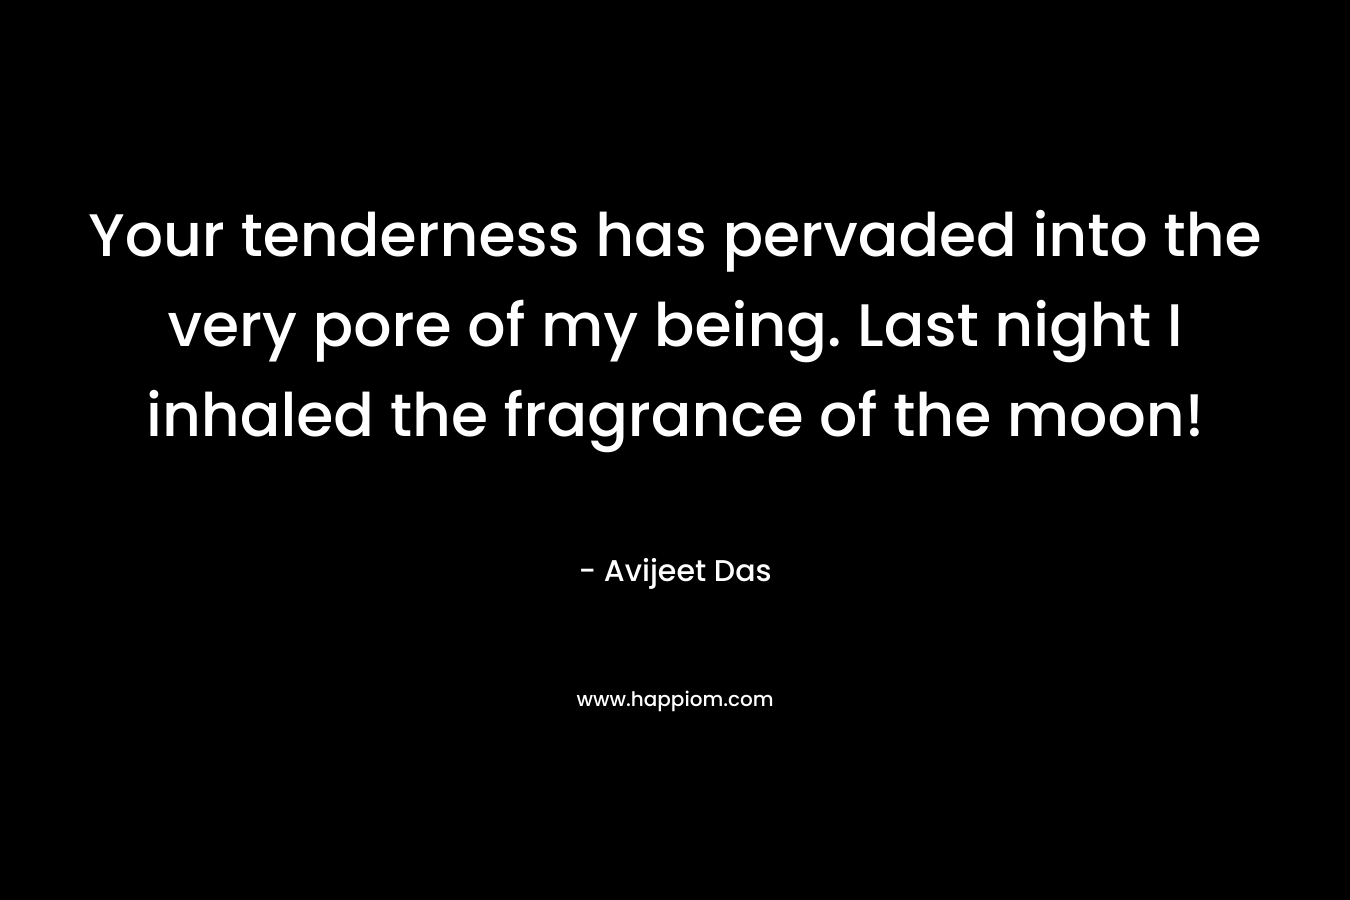 Your tenderness has pervaded into the very pore of my being. Last night I inhaled the fragrance of the moon!